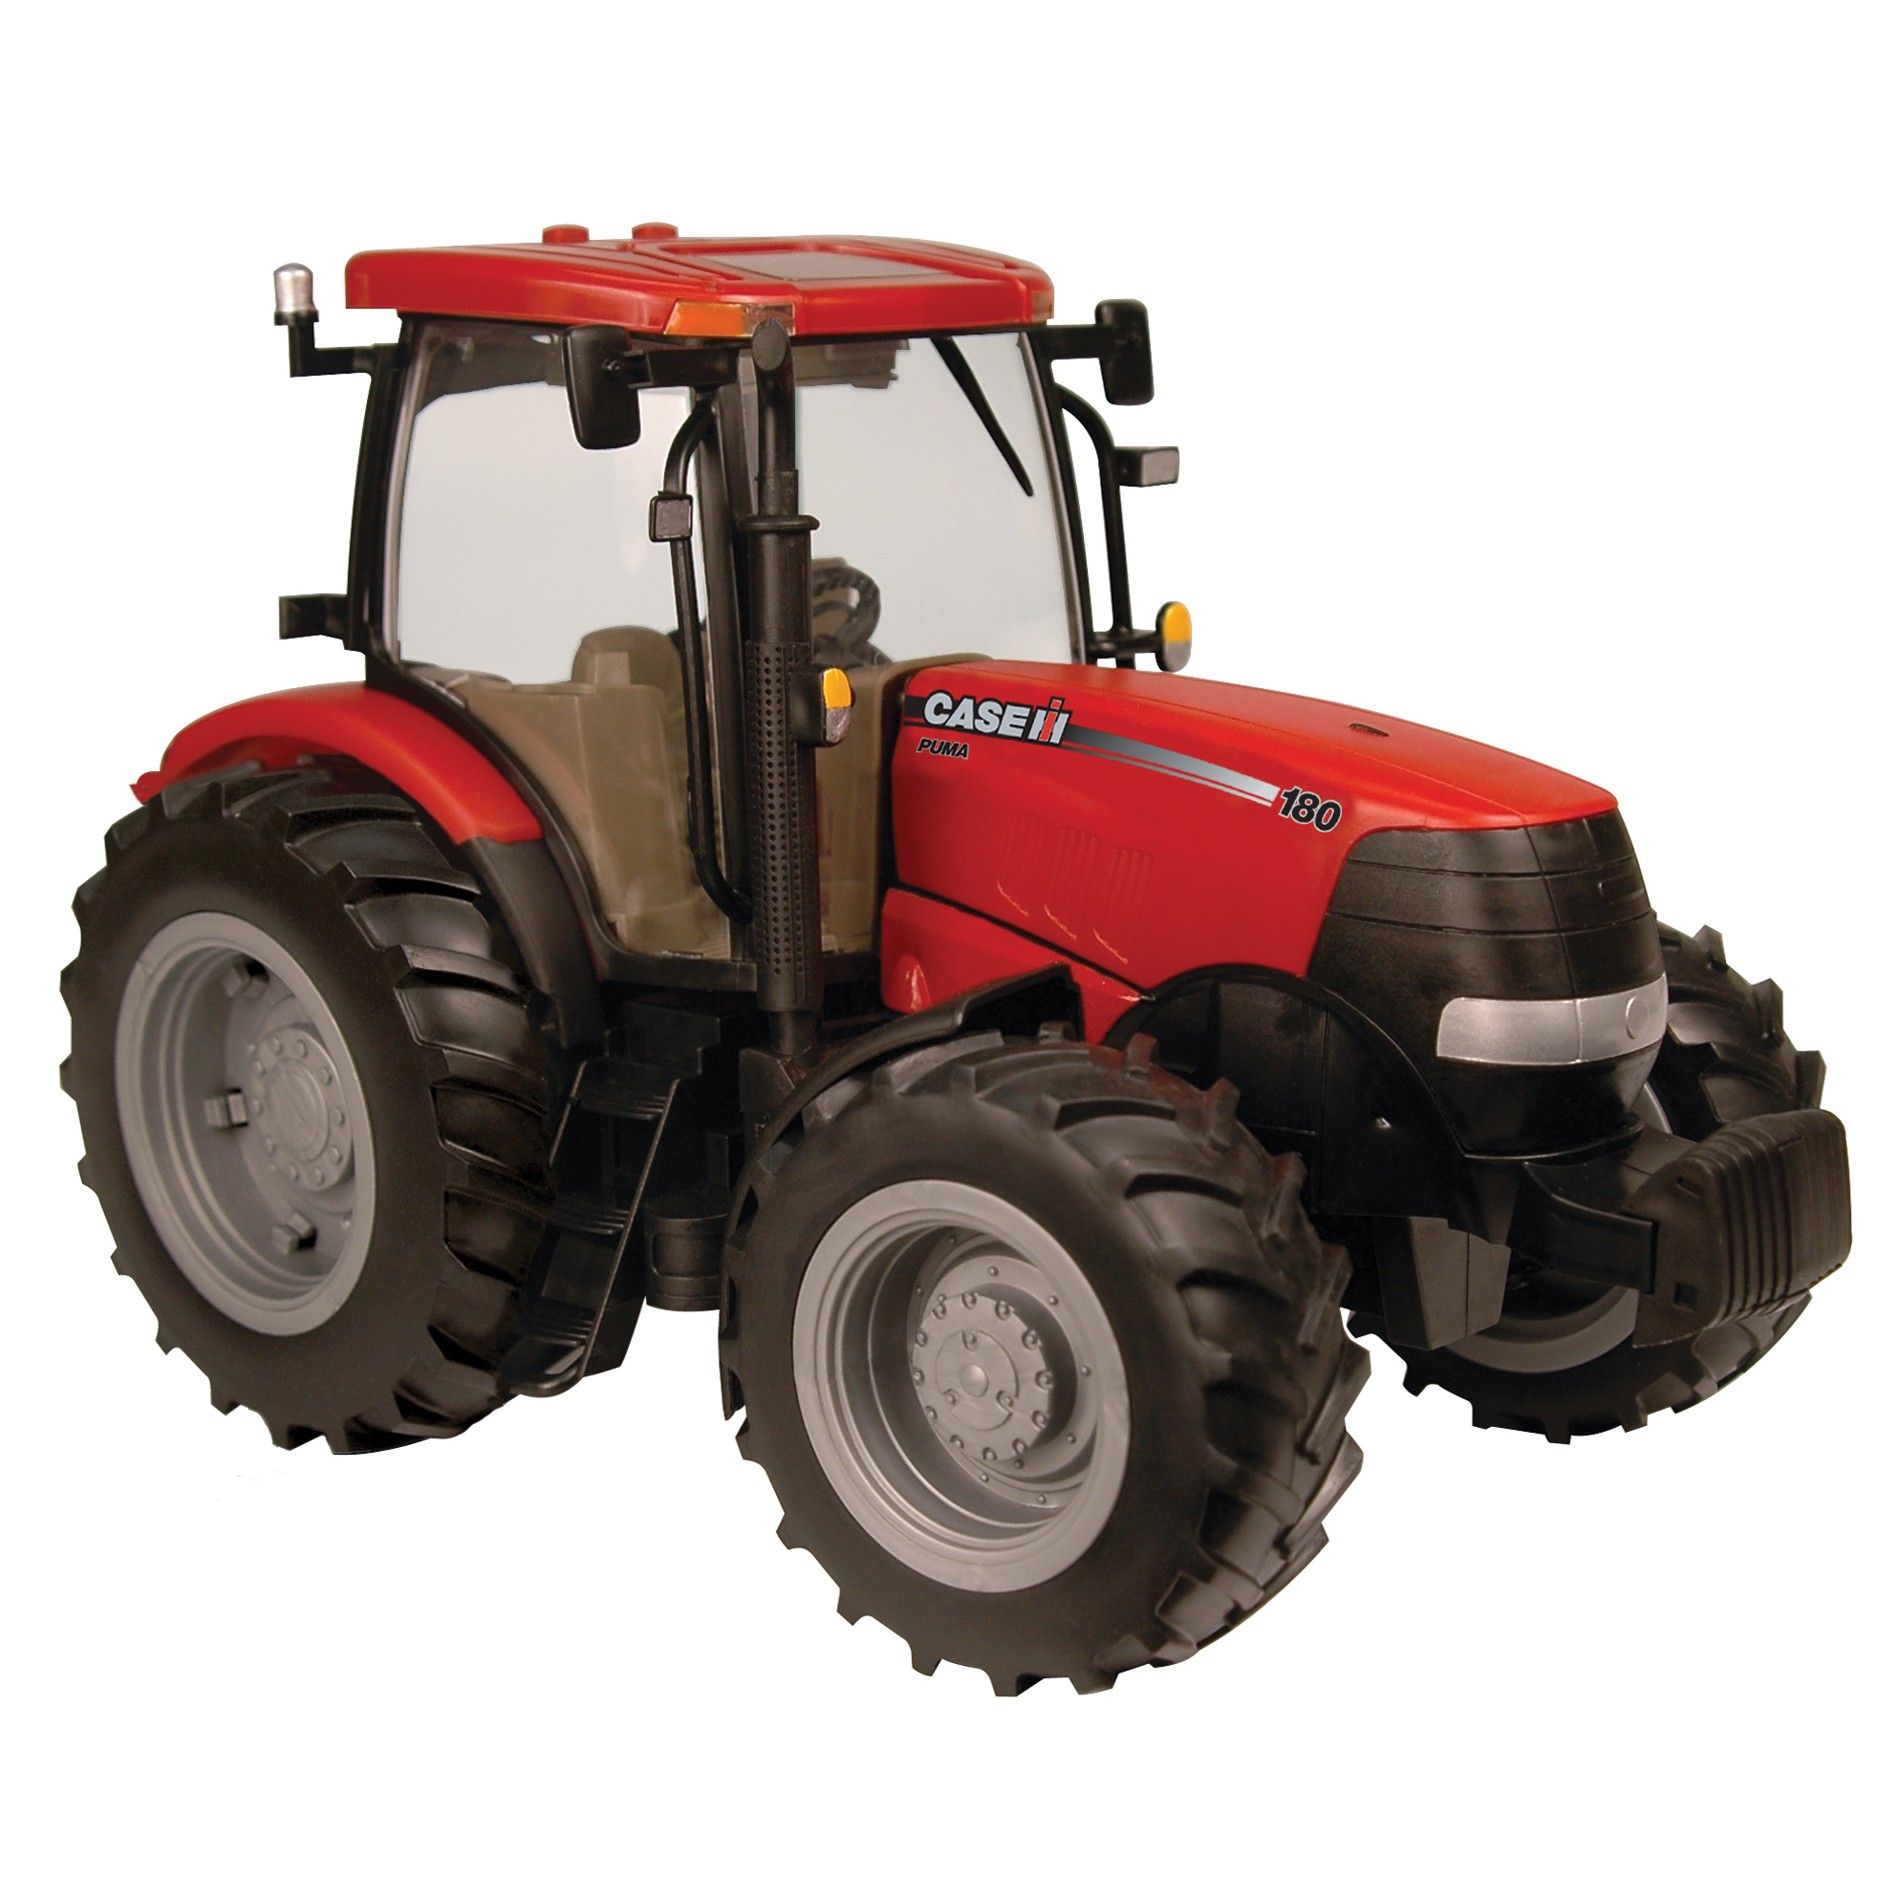 Case tractor clipart.